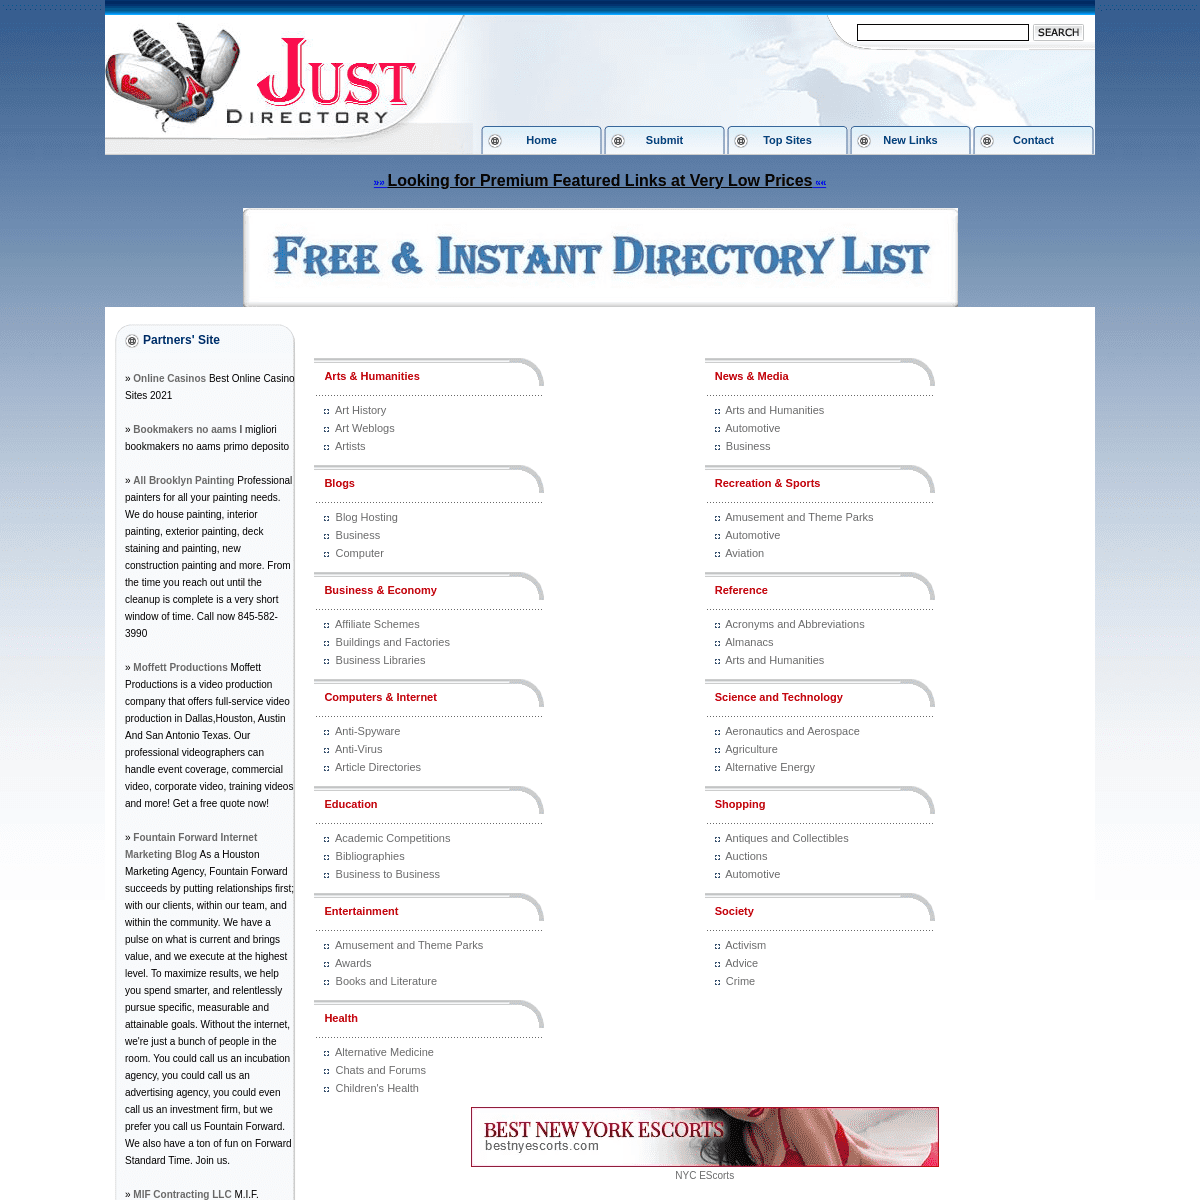 A complete backup of https://justdirectory.org